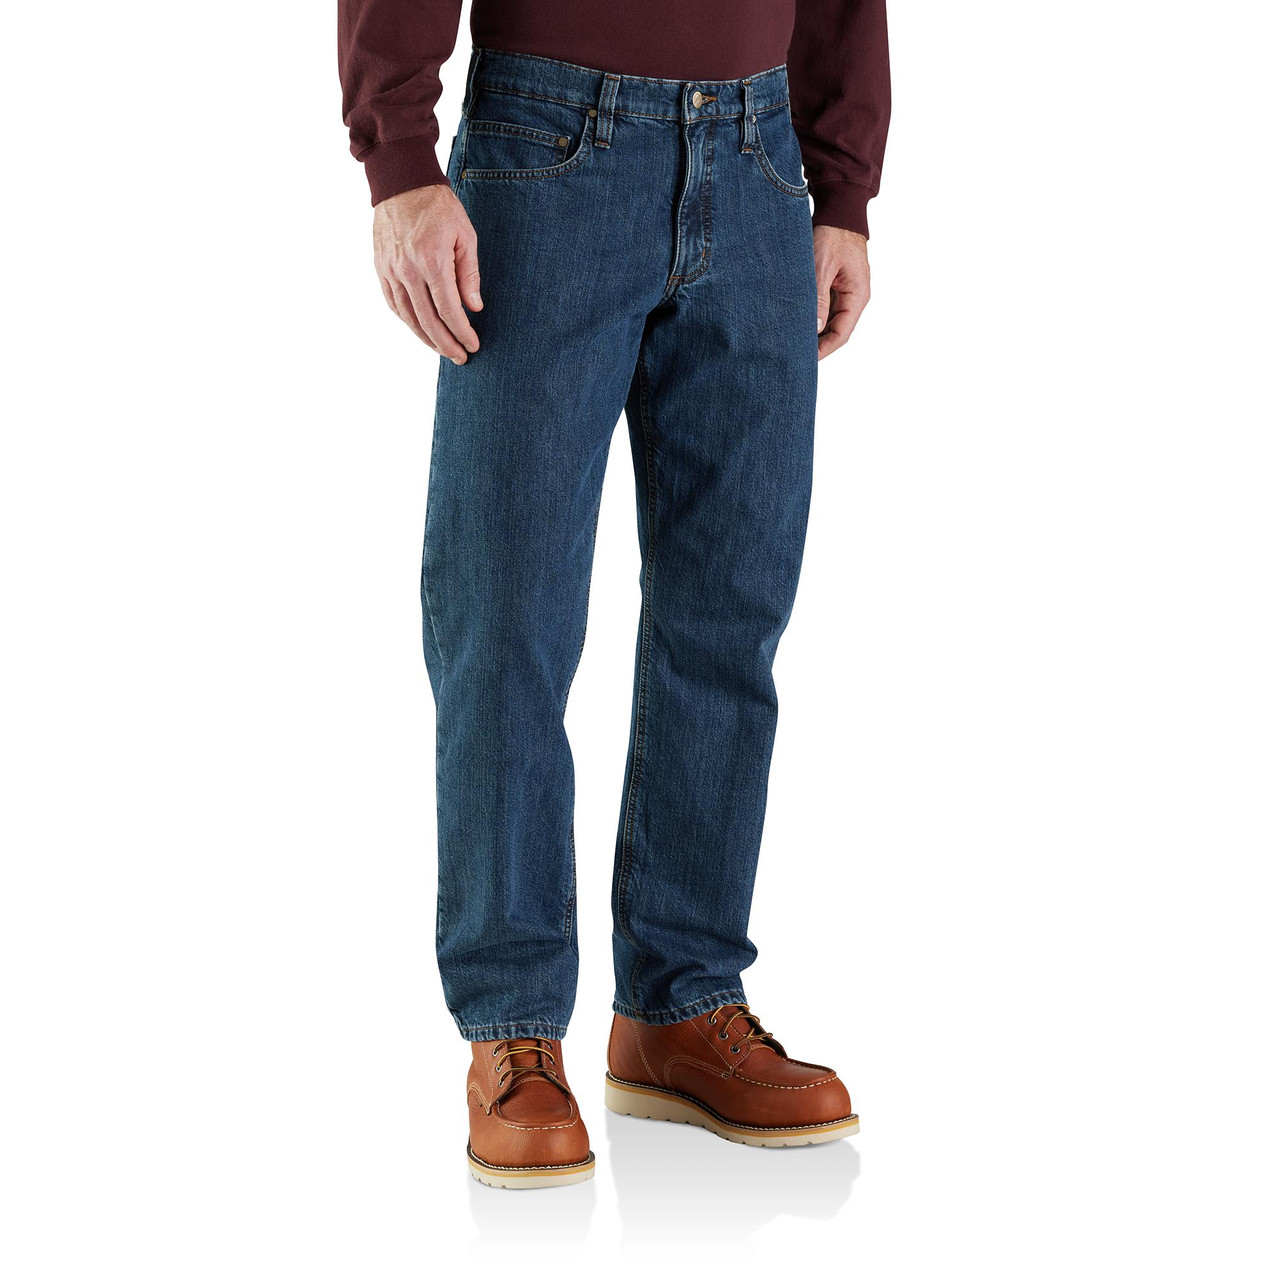 Men's Carhartt Relaxed Fit Flannel Lined Jeans - Herbert's Boots